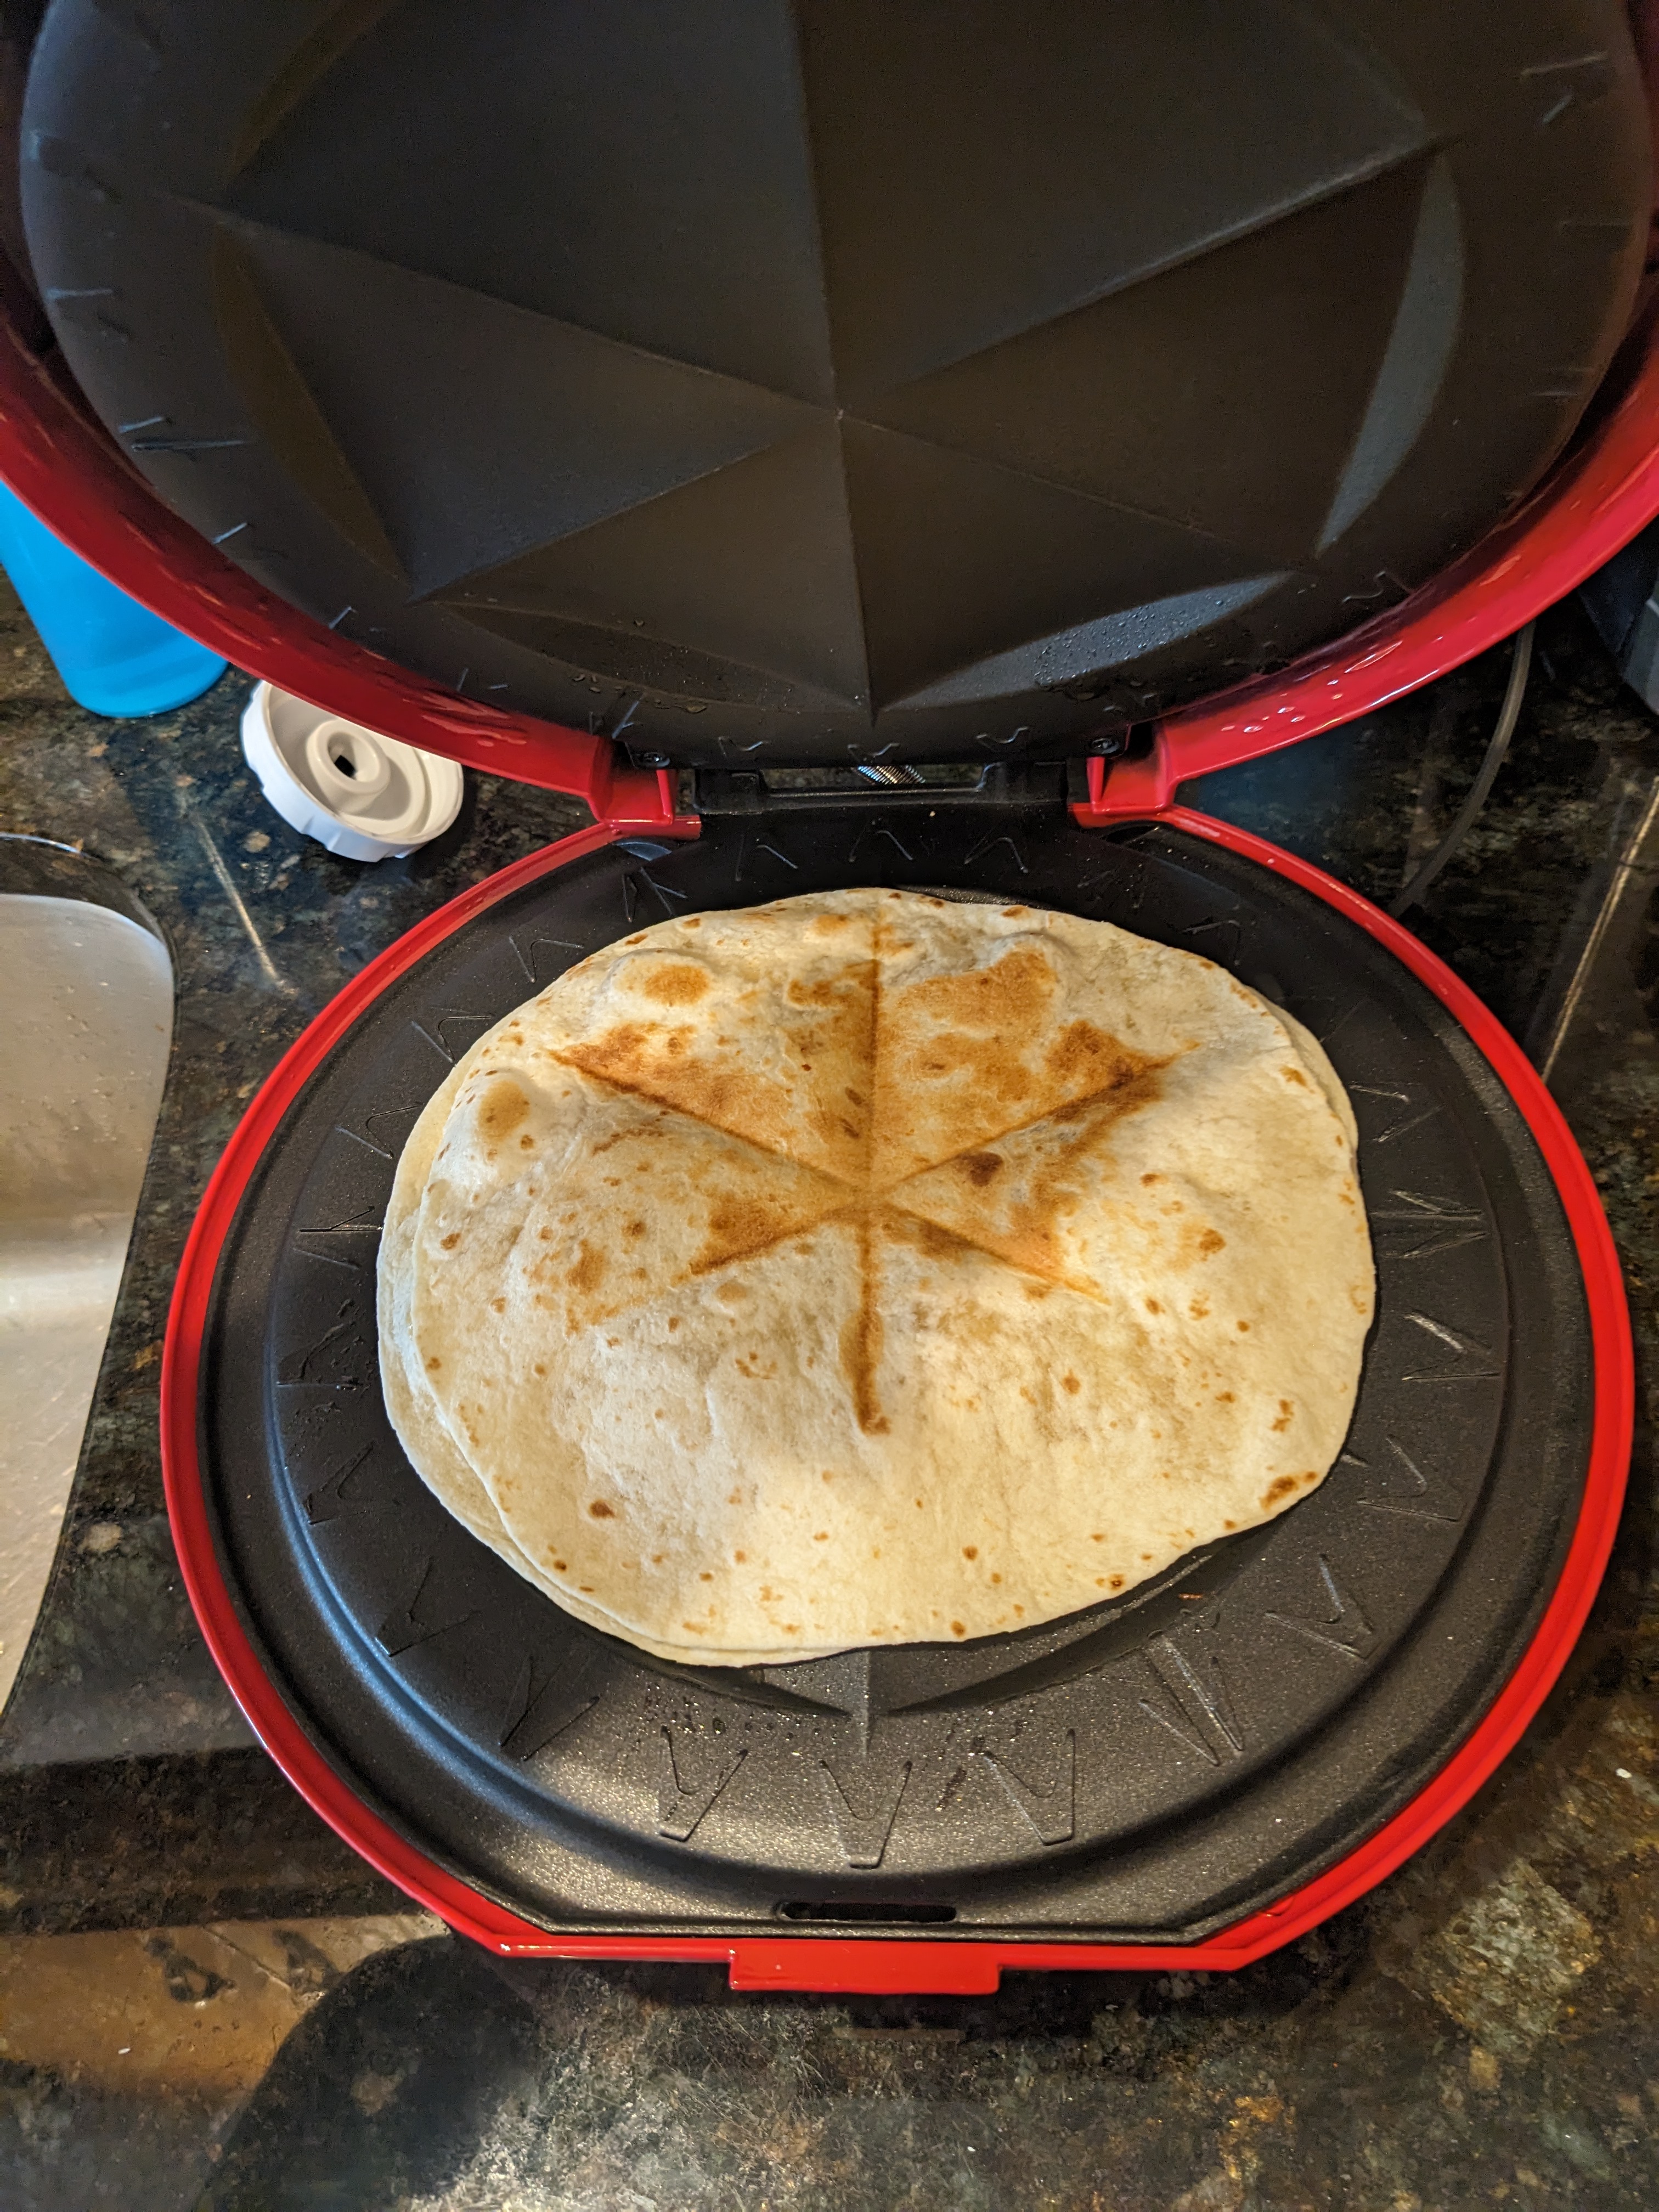 5 Best Quesadilla Makers 2023 Reviewed, Shopping : Food Network